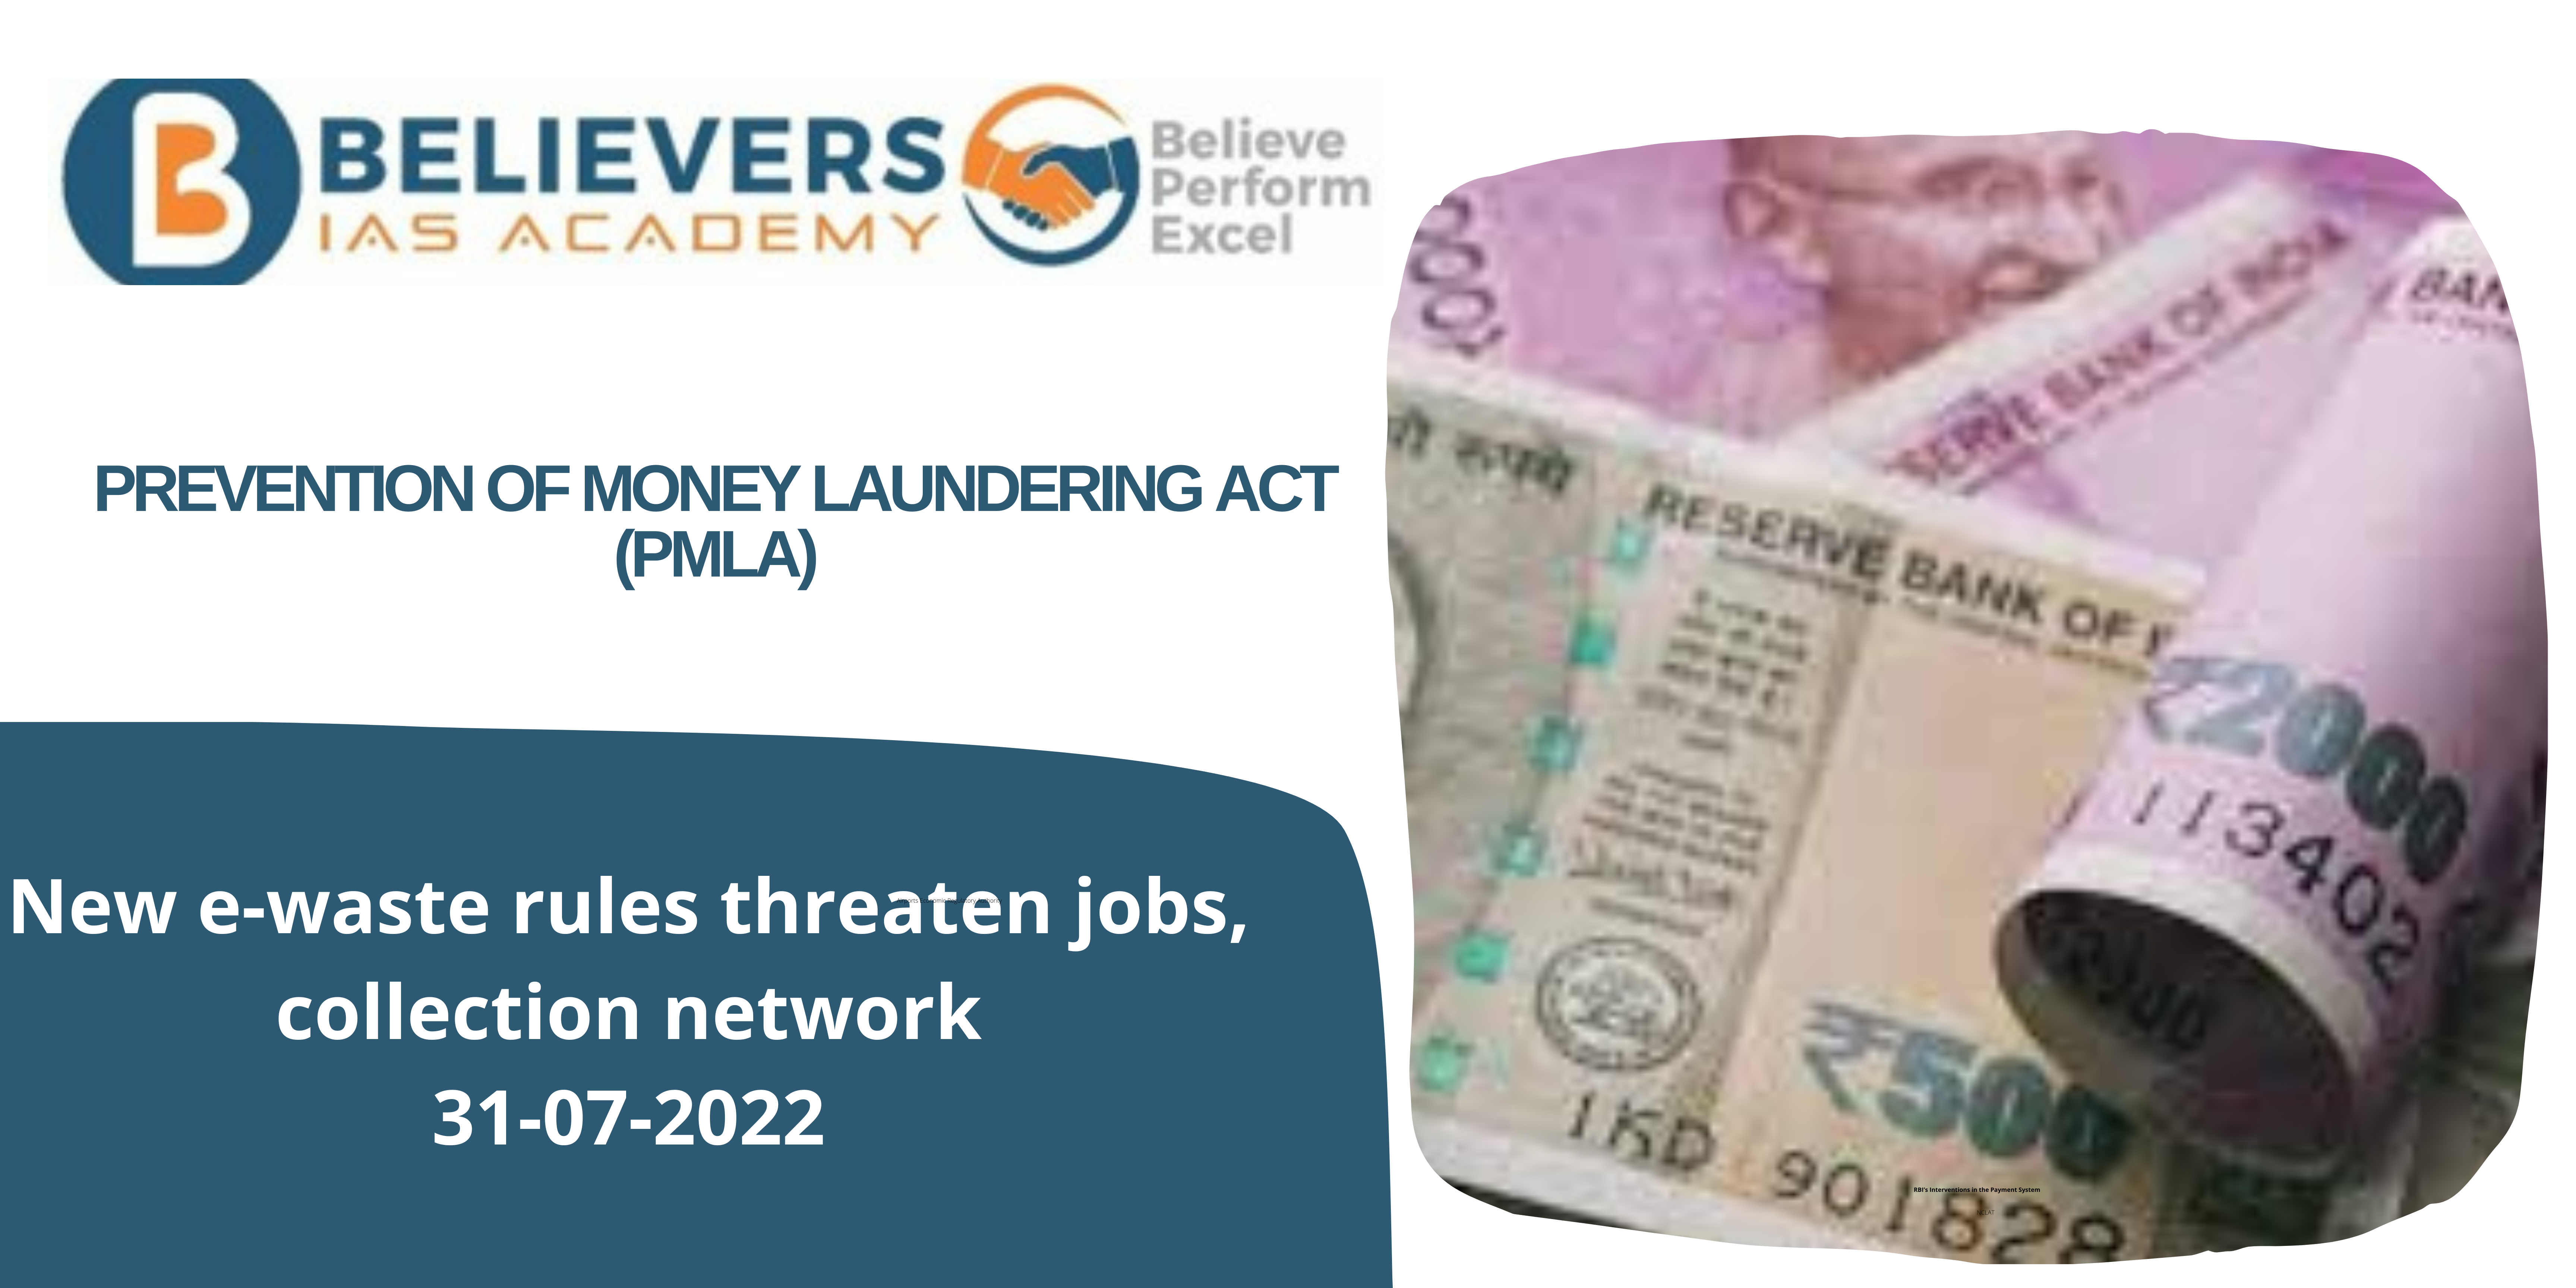 Civil services Current affairs - Prevention of Money Laundering Act (PMLA)